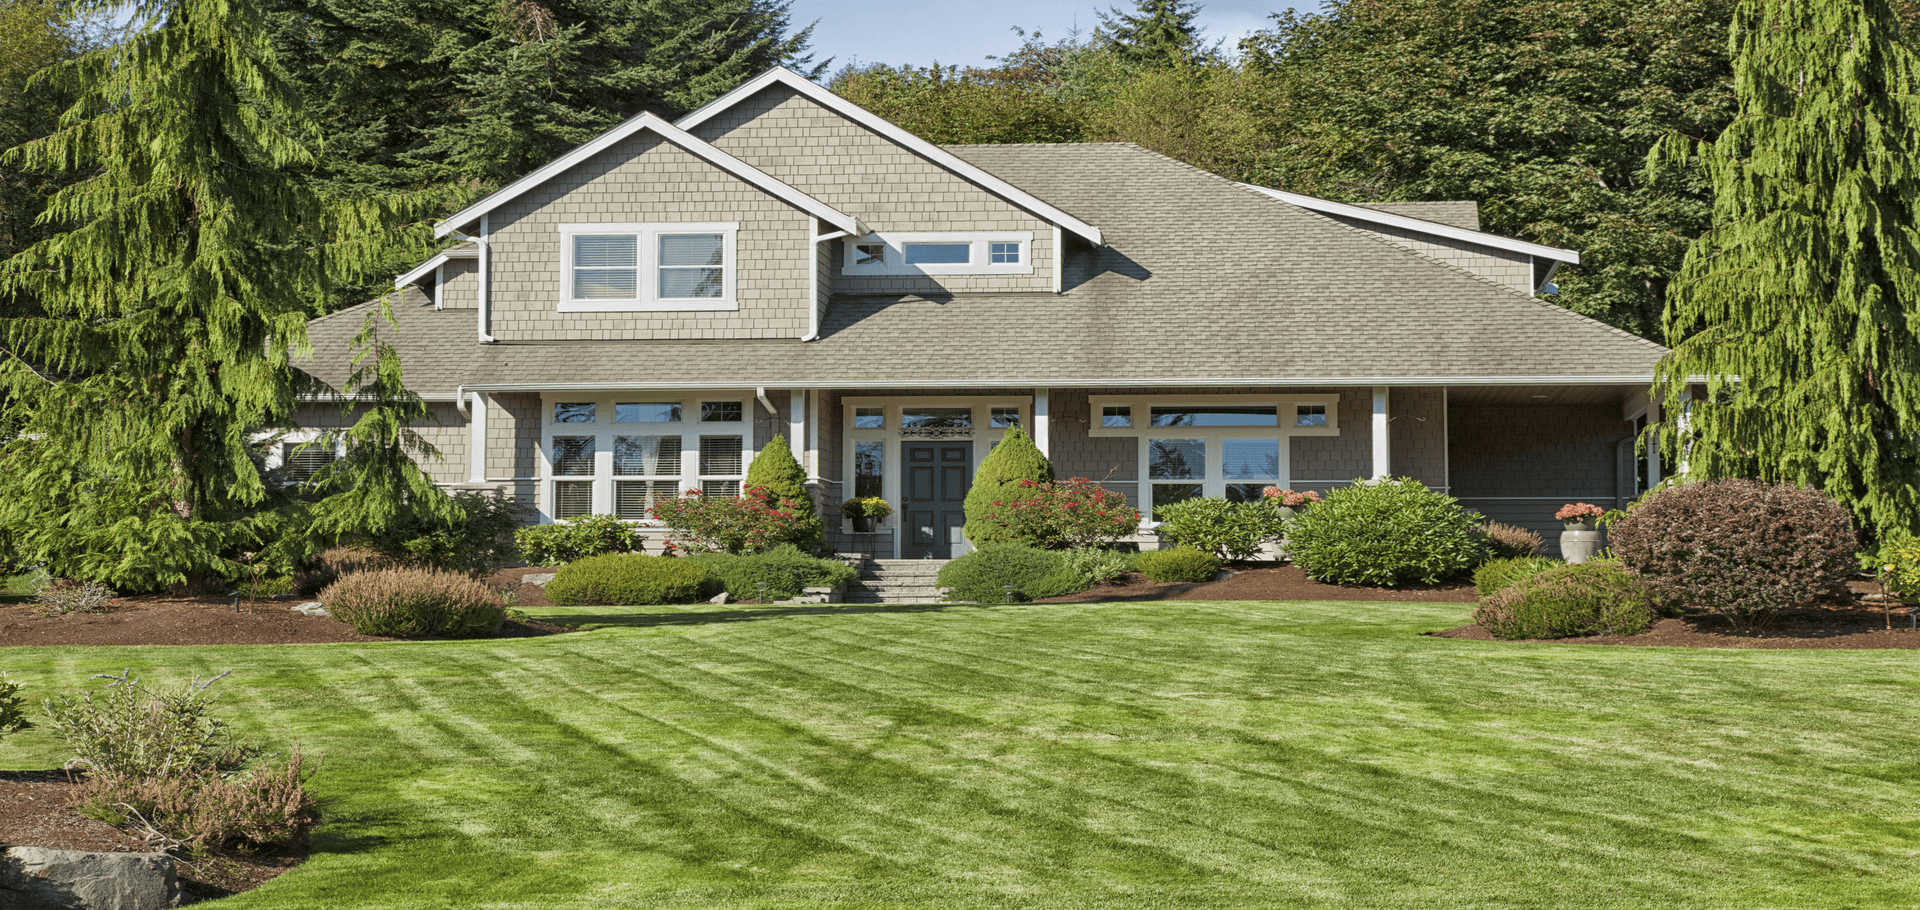 Differences Between Lawn Care & Landscaping